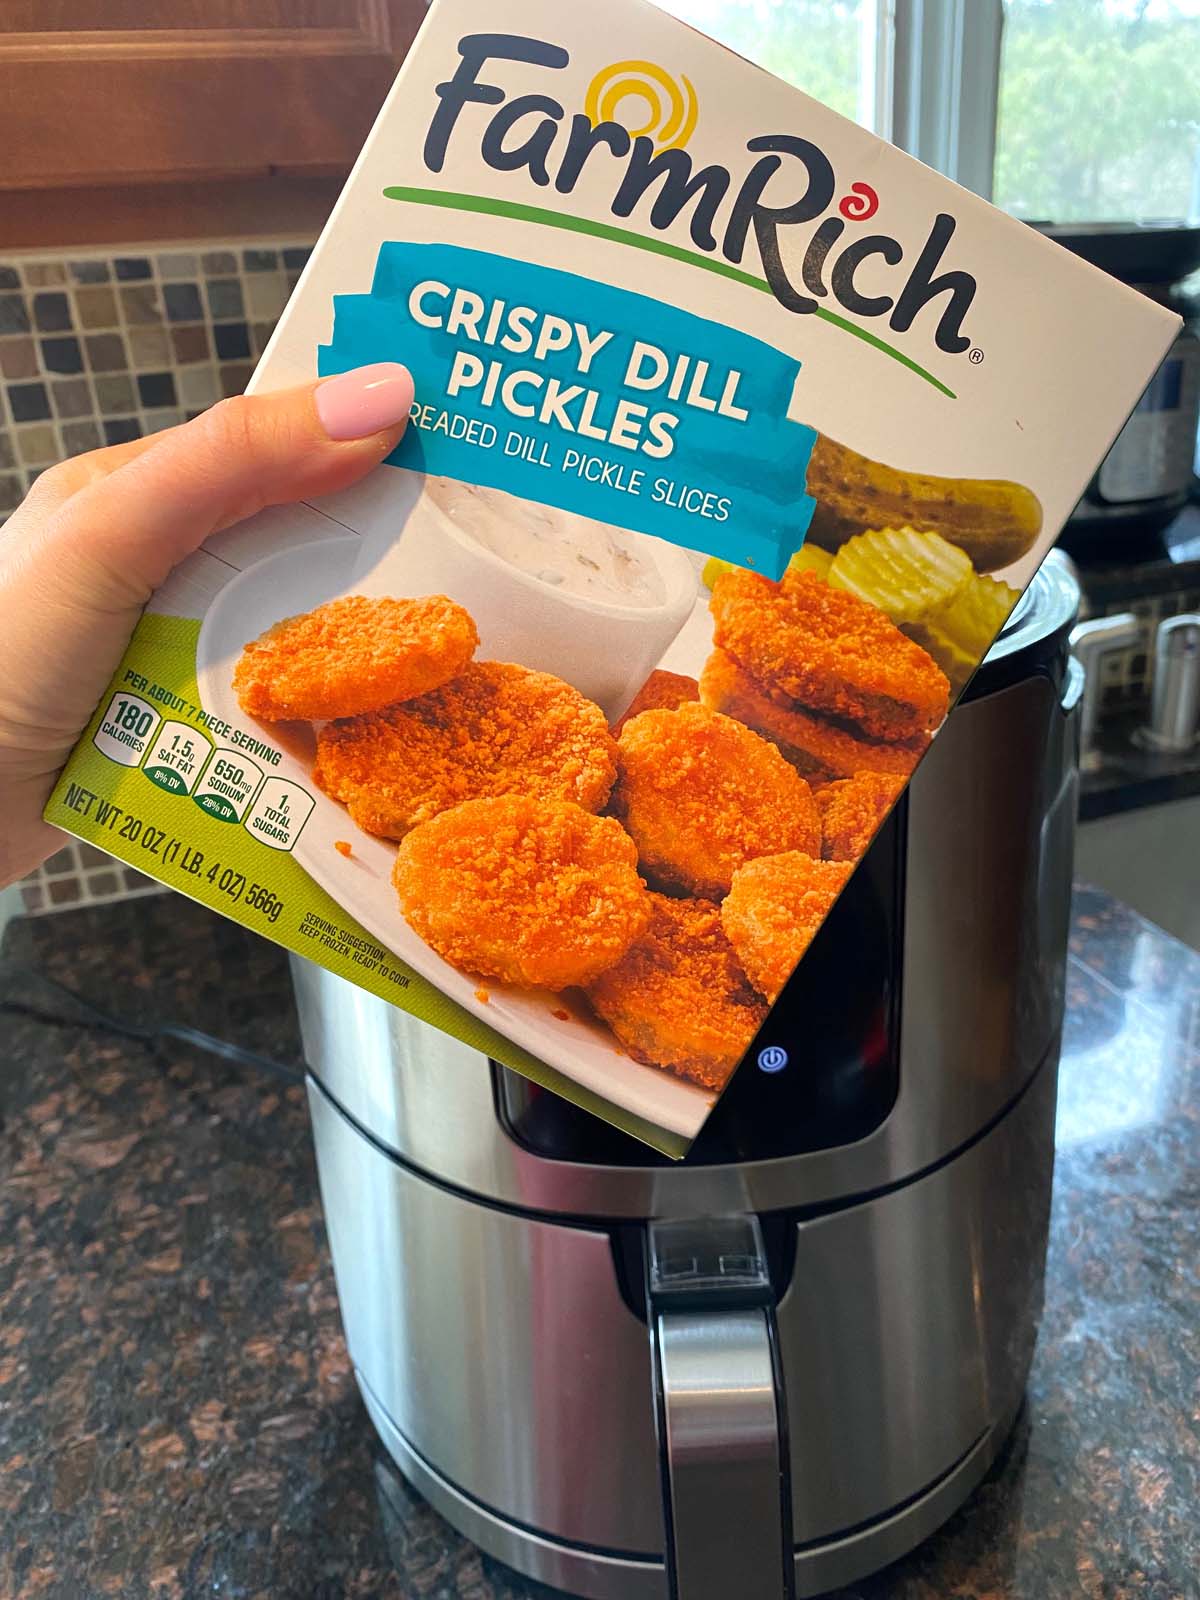 Box of Farm Fresh brand frozen fried pickles held in front of an air fryer.